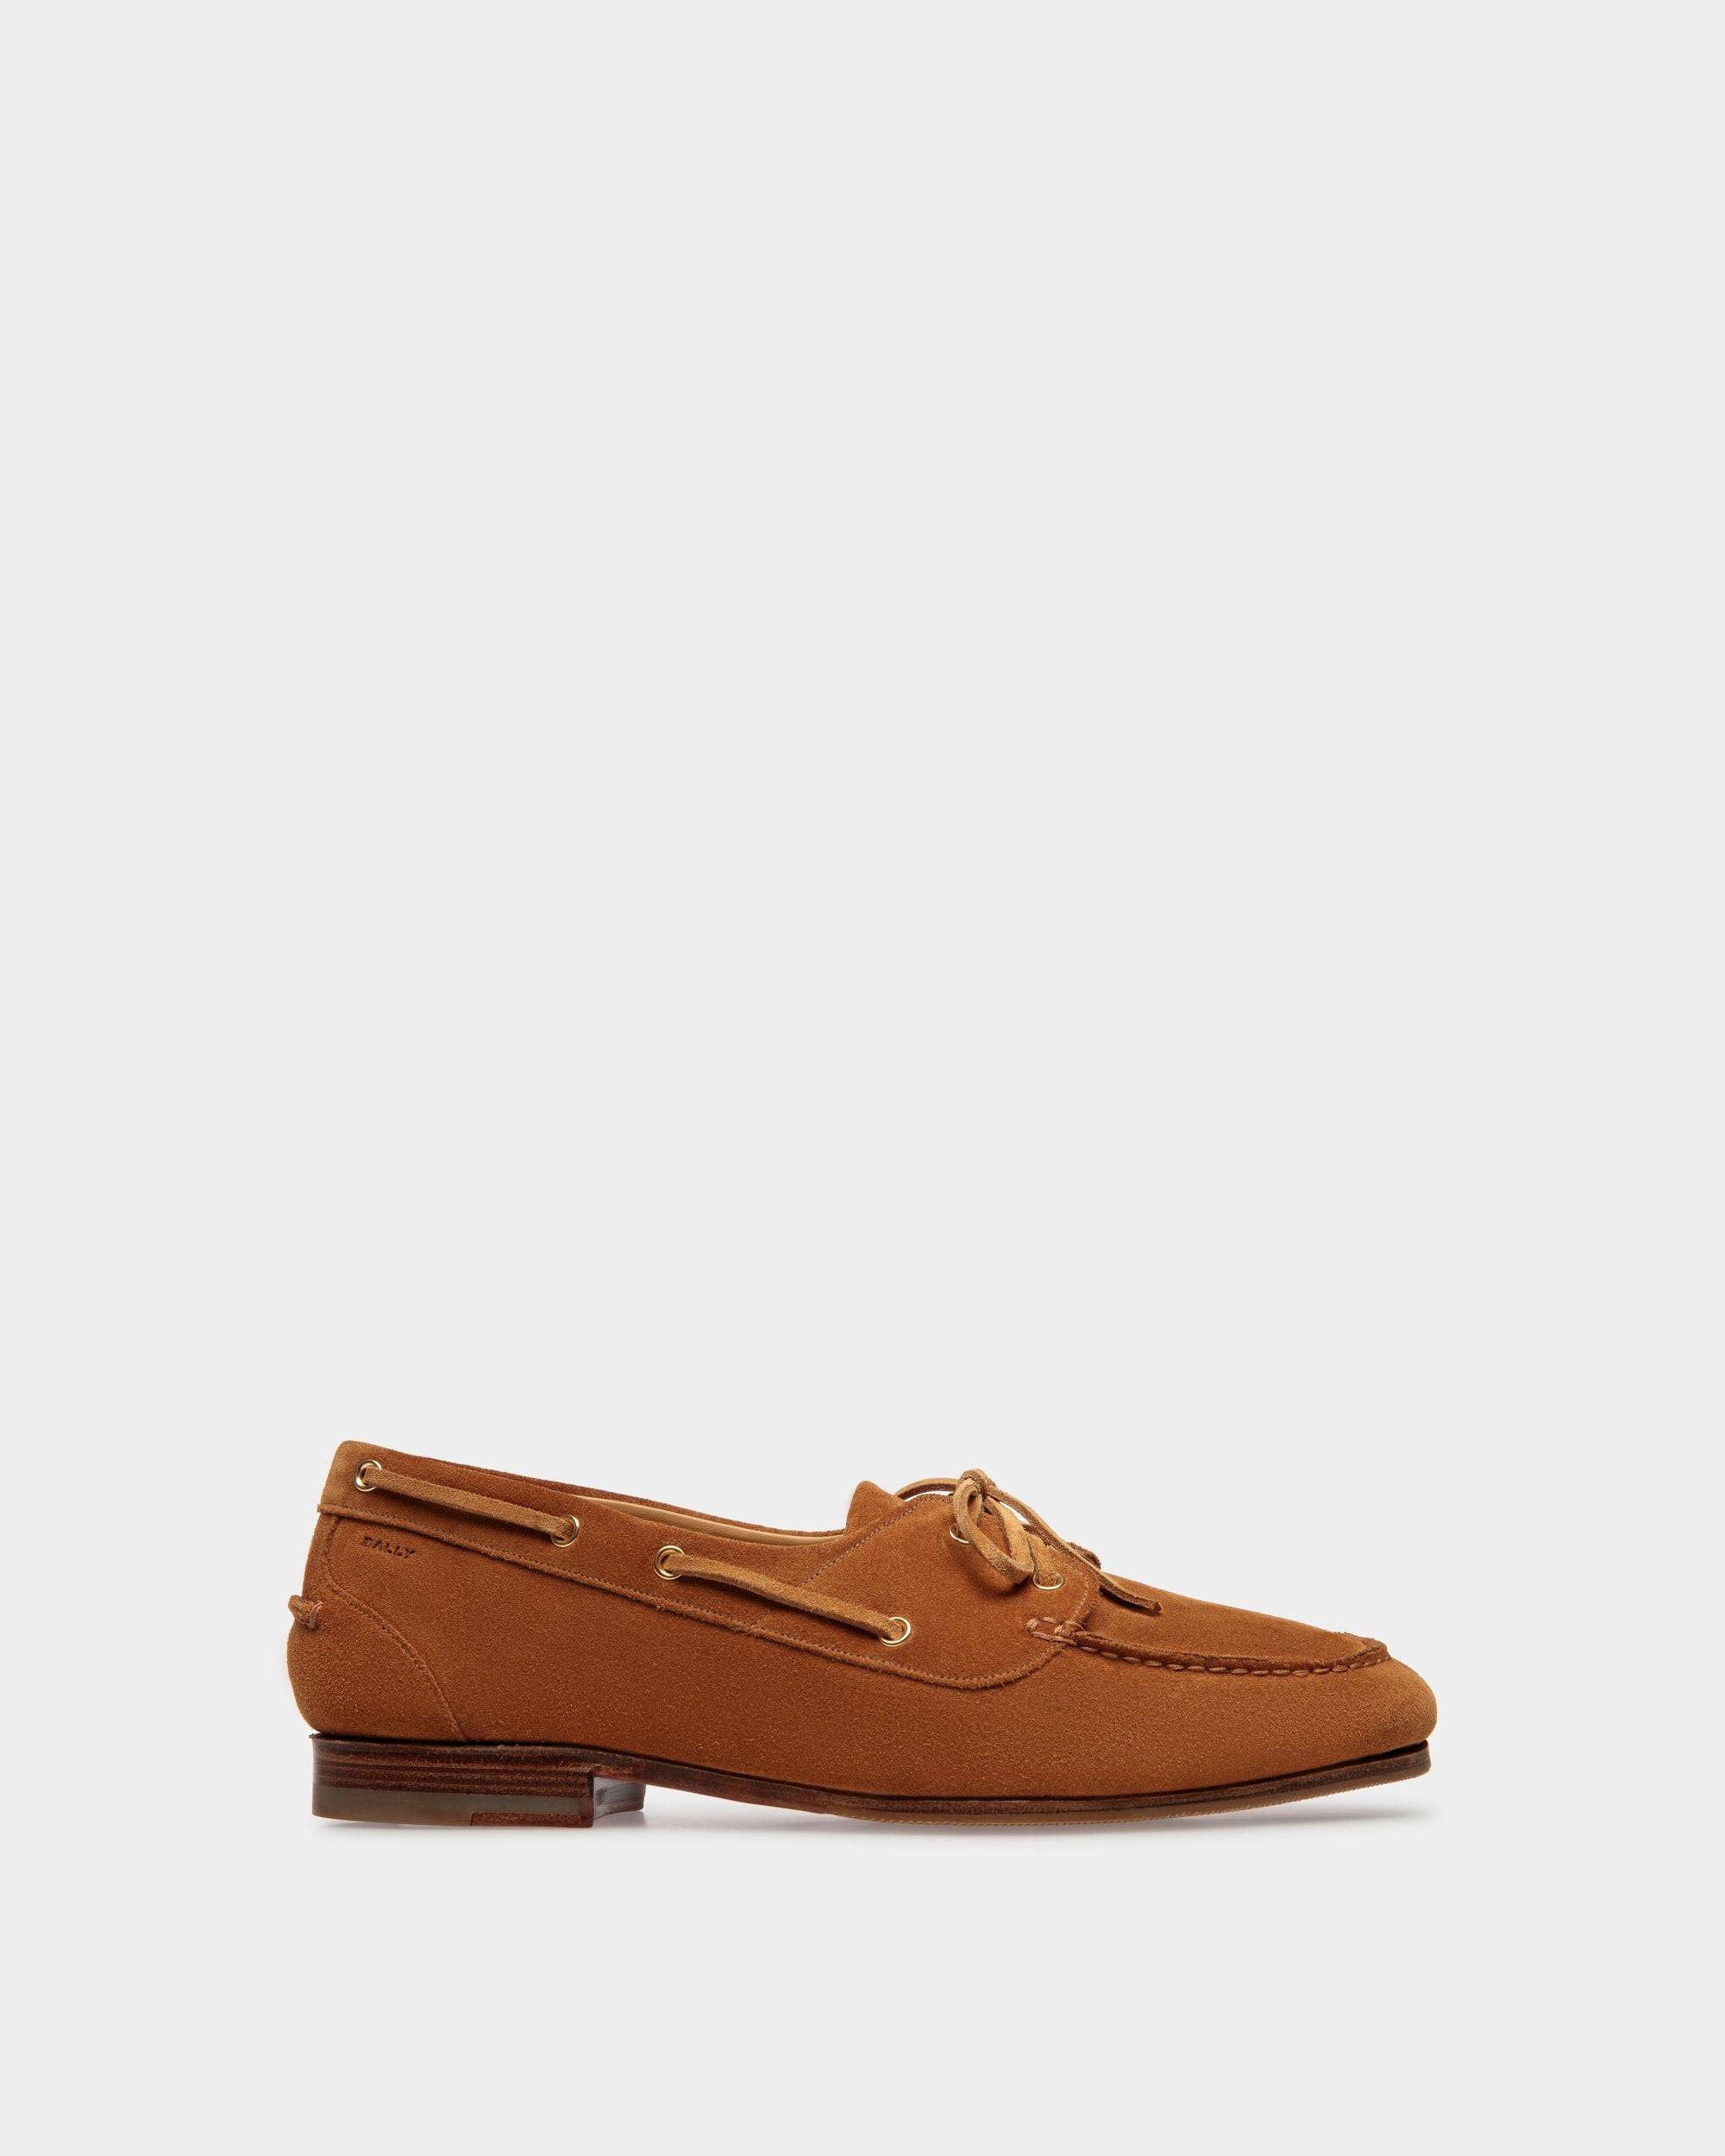 Men's Plume Moccasin in Brown Suede | Bally | Still Life Side